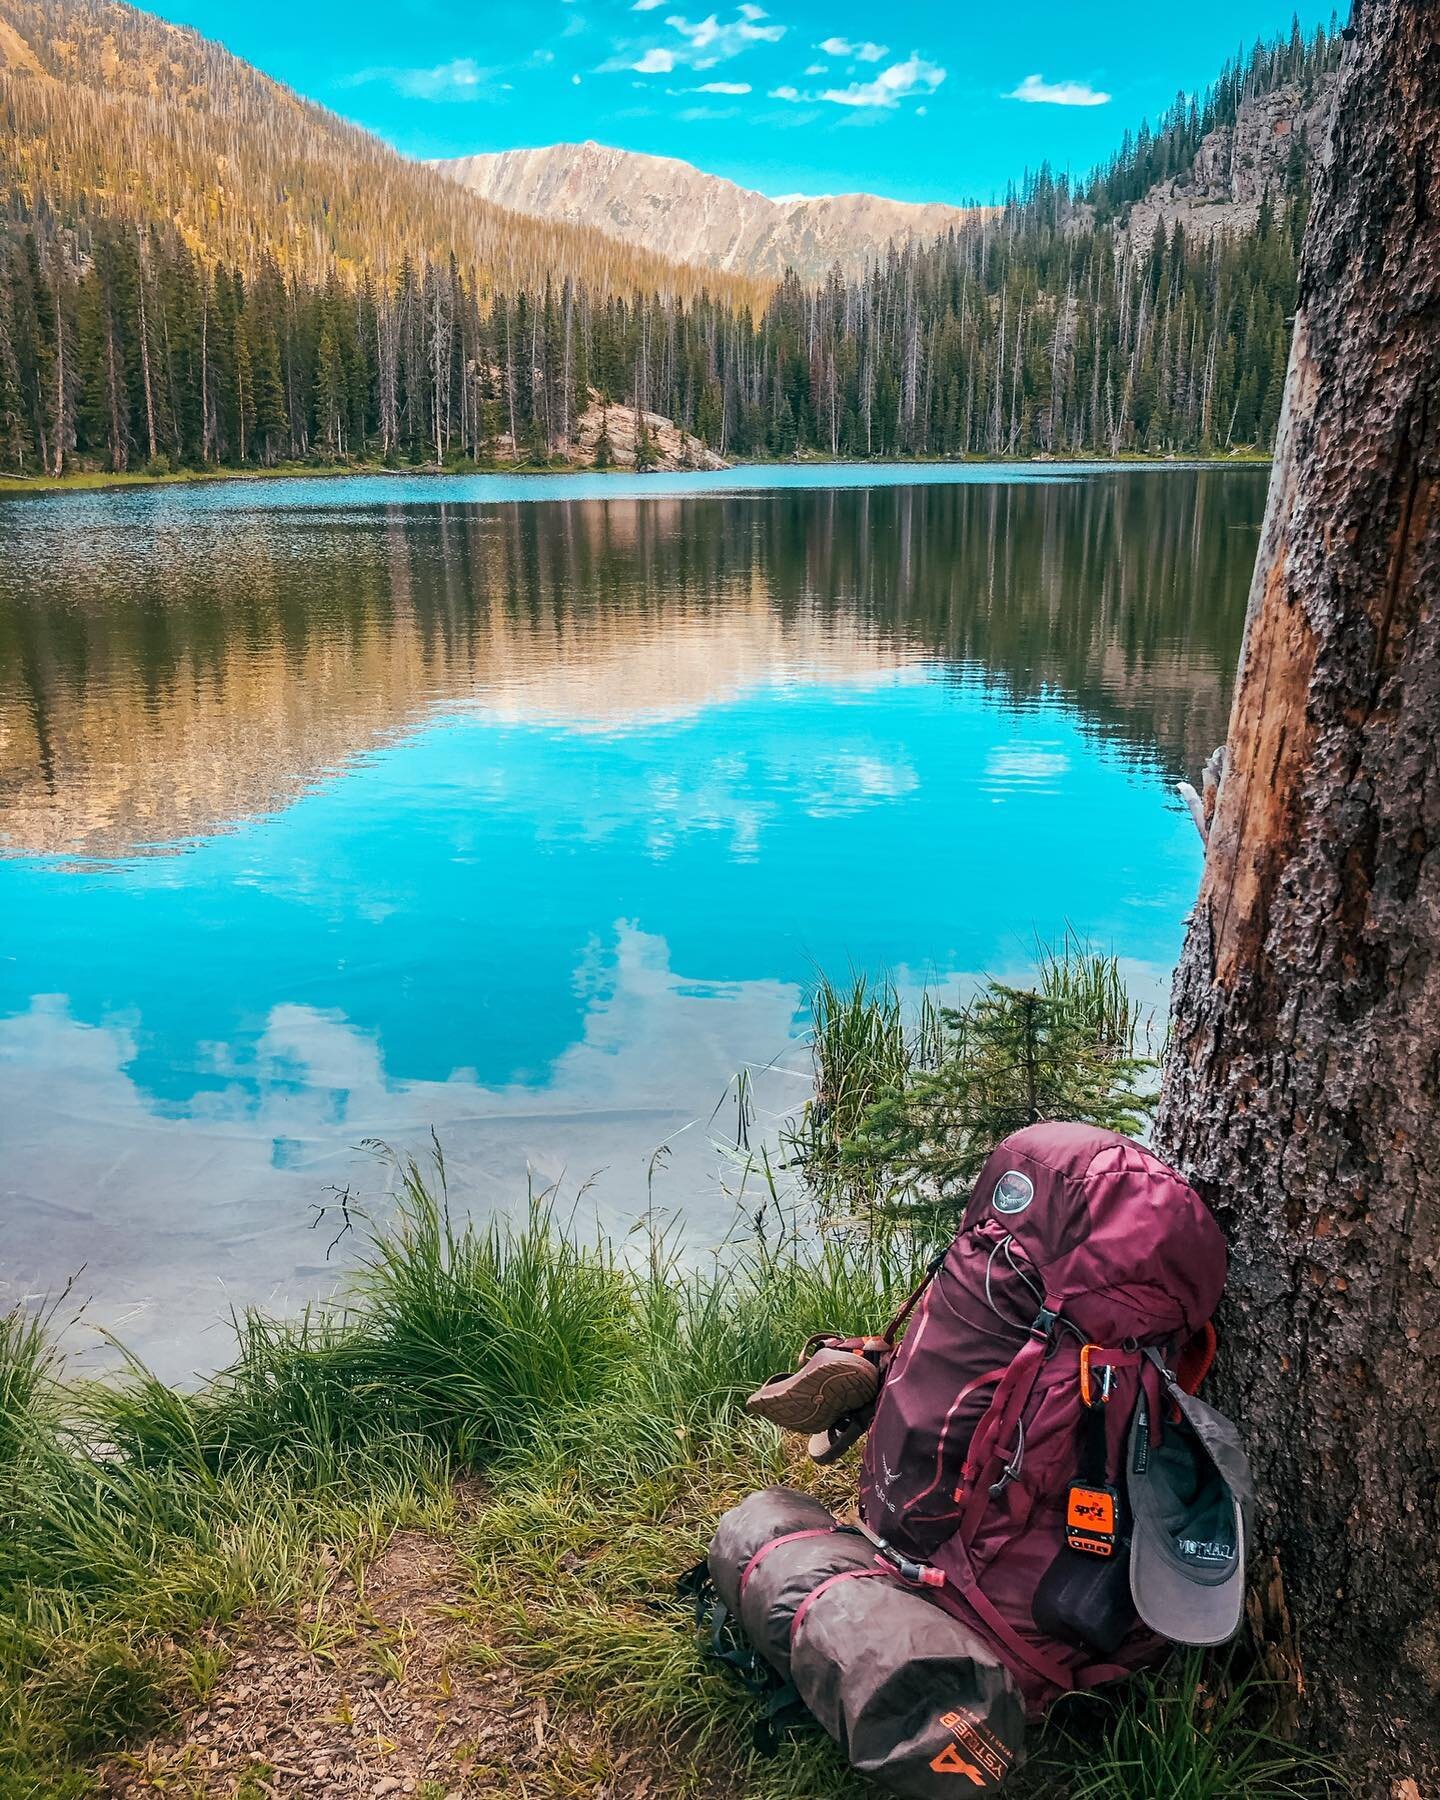 ⛺️Renting Backpacking Gear: Part Two ⛺️

Still can't find the rental gear you&rsquo;re looking for? Well, you&rsquo;re in luck because there are several online rentals you can get gear from that will deliver directly to your door! 
 
Start with some 